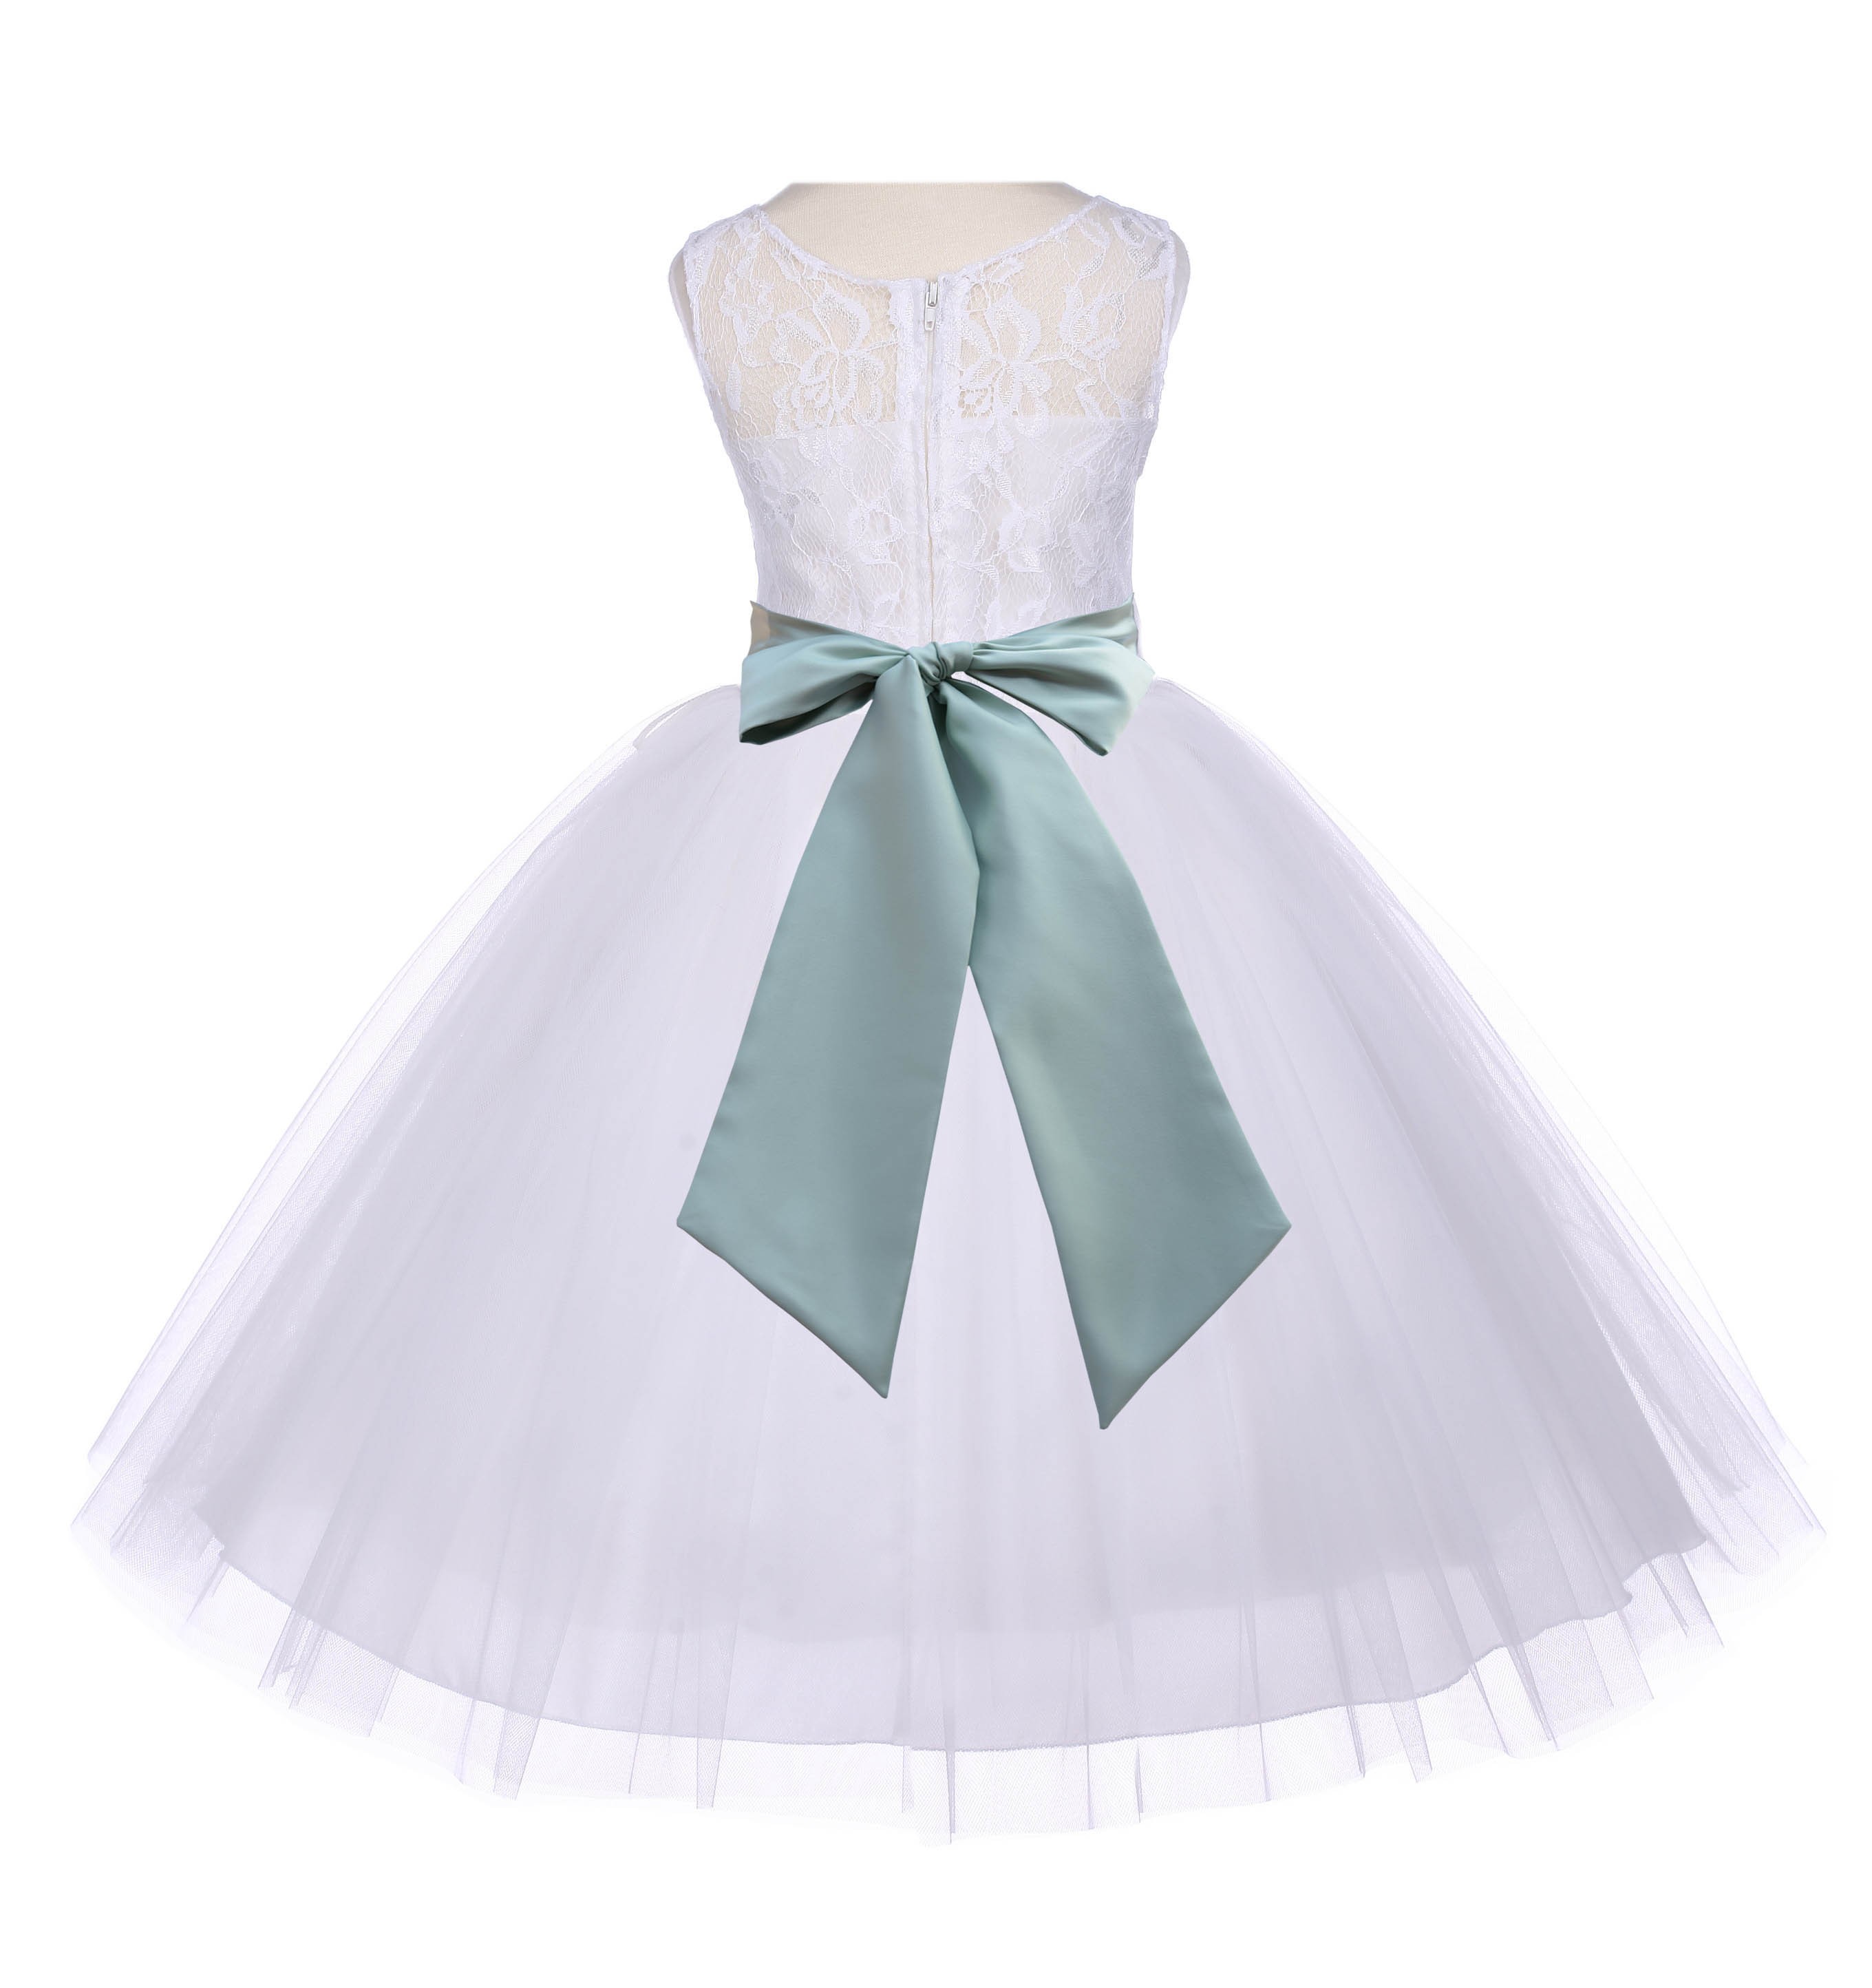 Ivory/Sage Floral Lace Bodice Tulle Flower Girl Dress Bridesmaid 153S